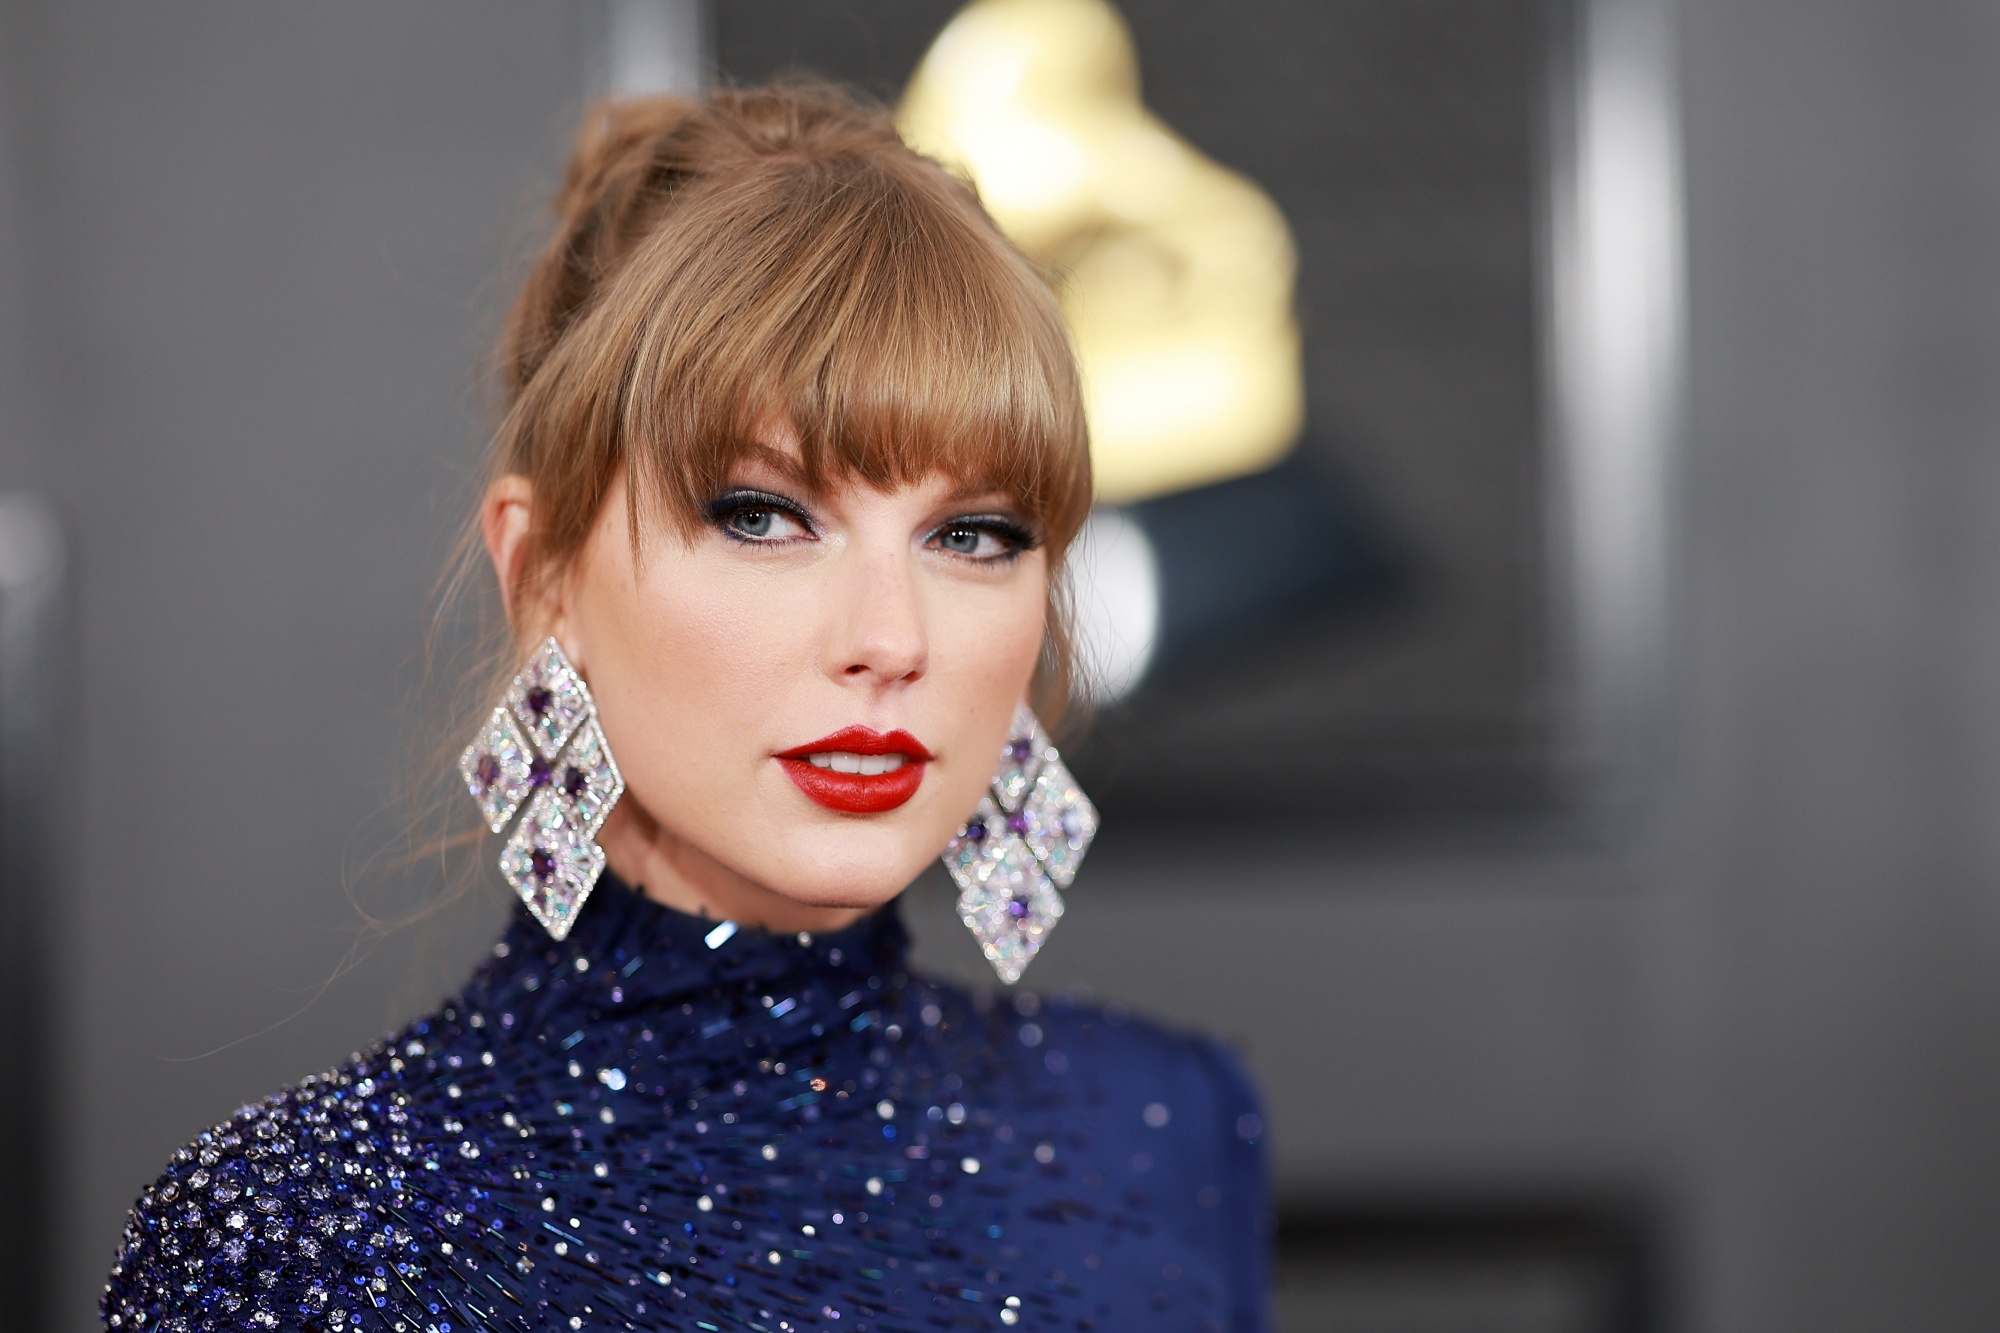 Taylor Swift AI Deepfakes: Were They Illegal? Can They Be Stopped